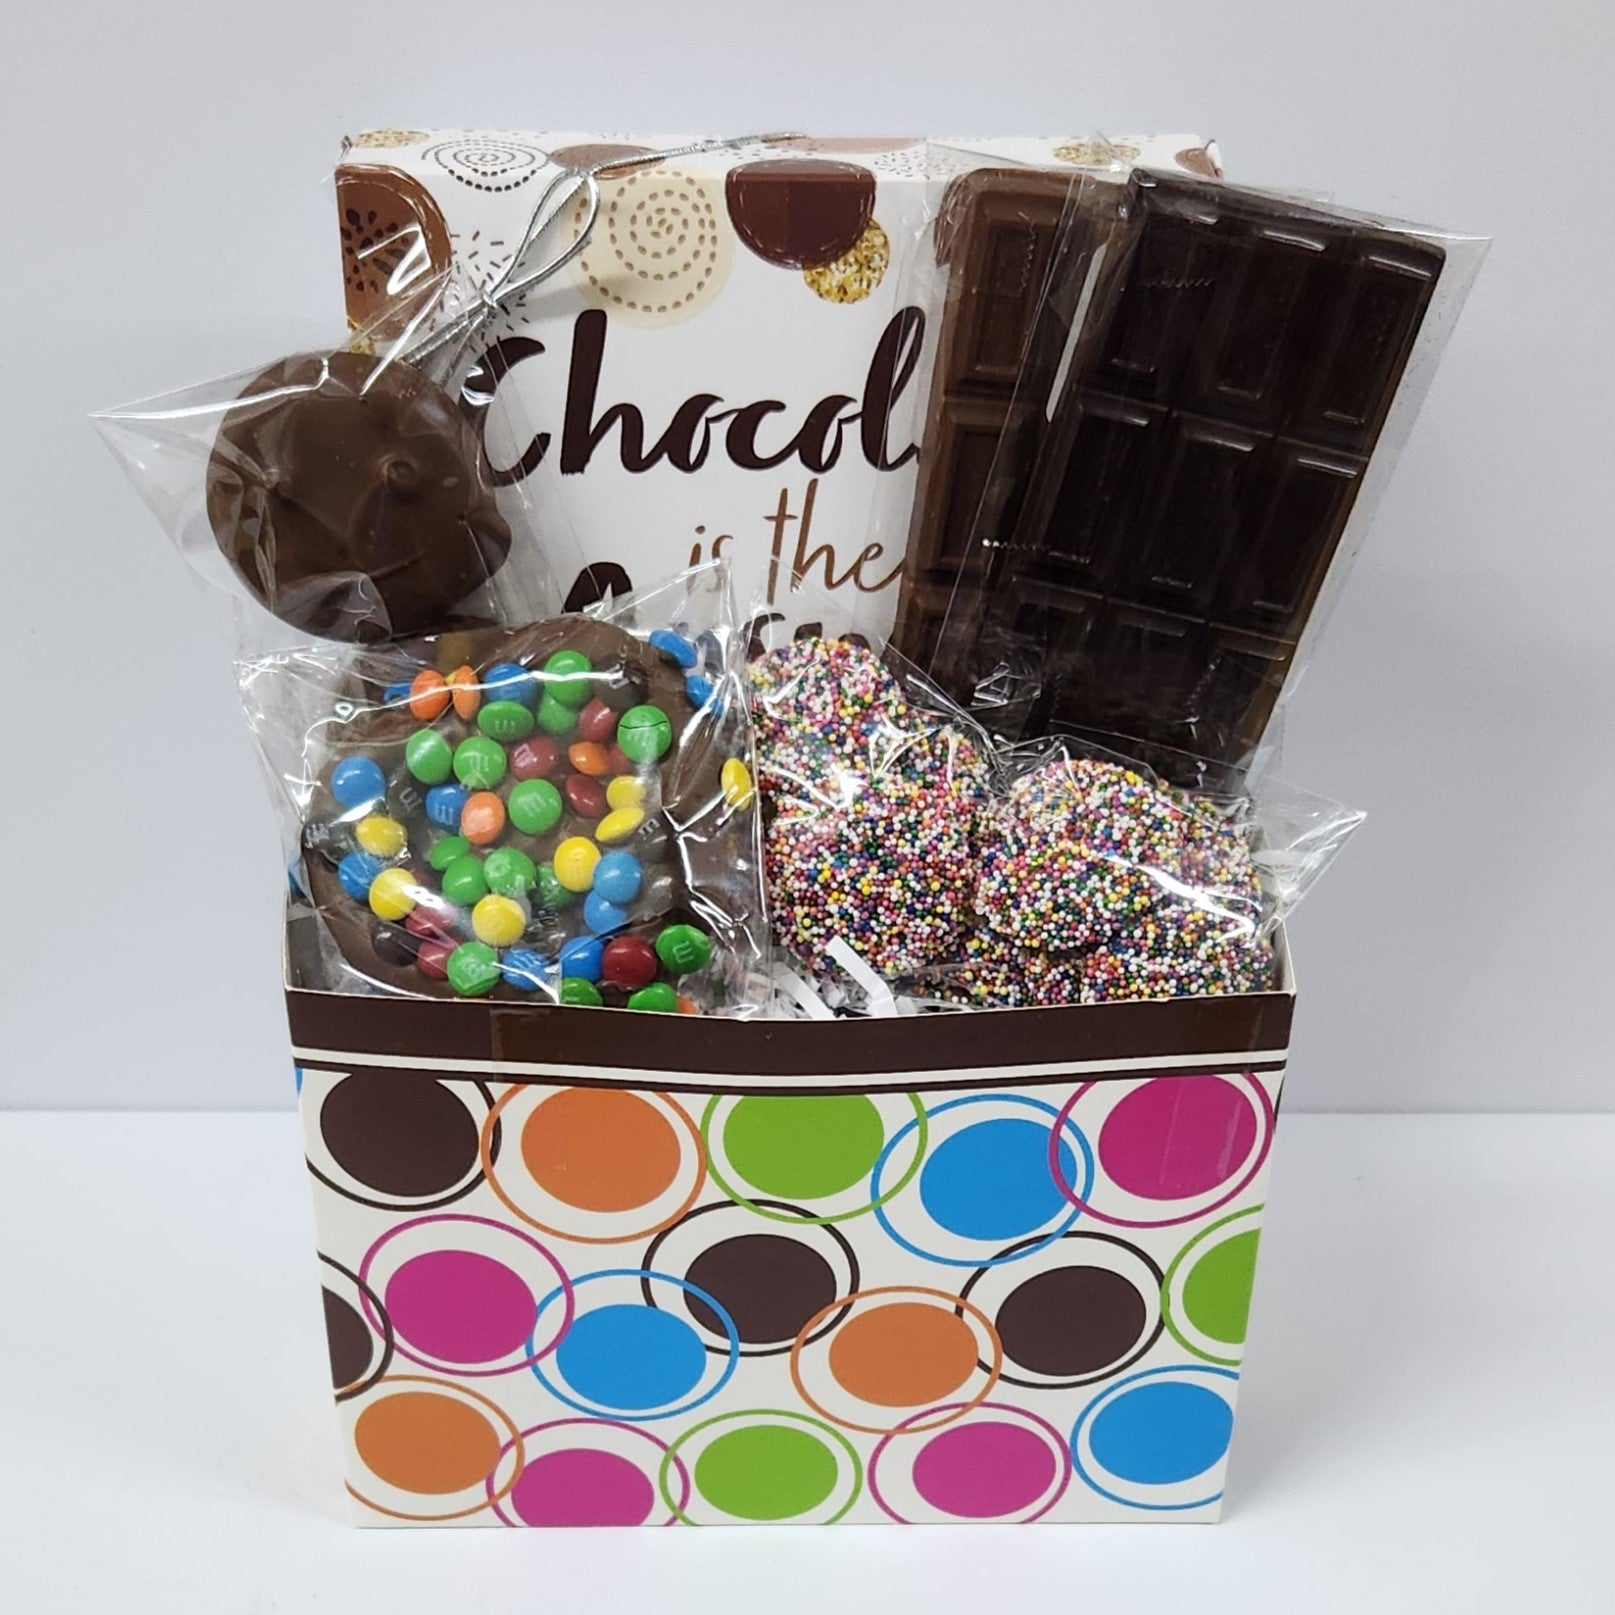 Chocolate Lovers Full Size Candy Bar Gift Basket